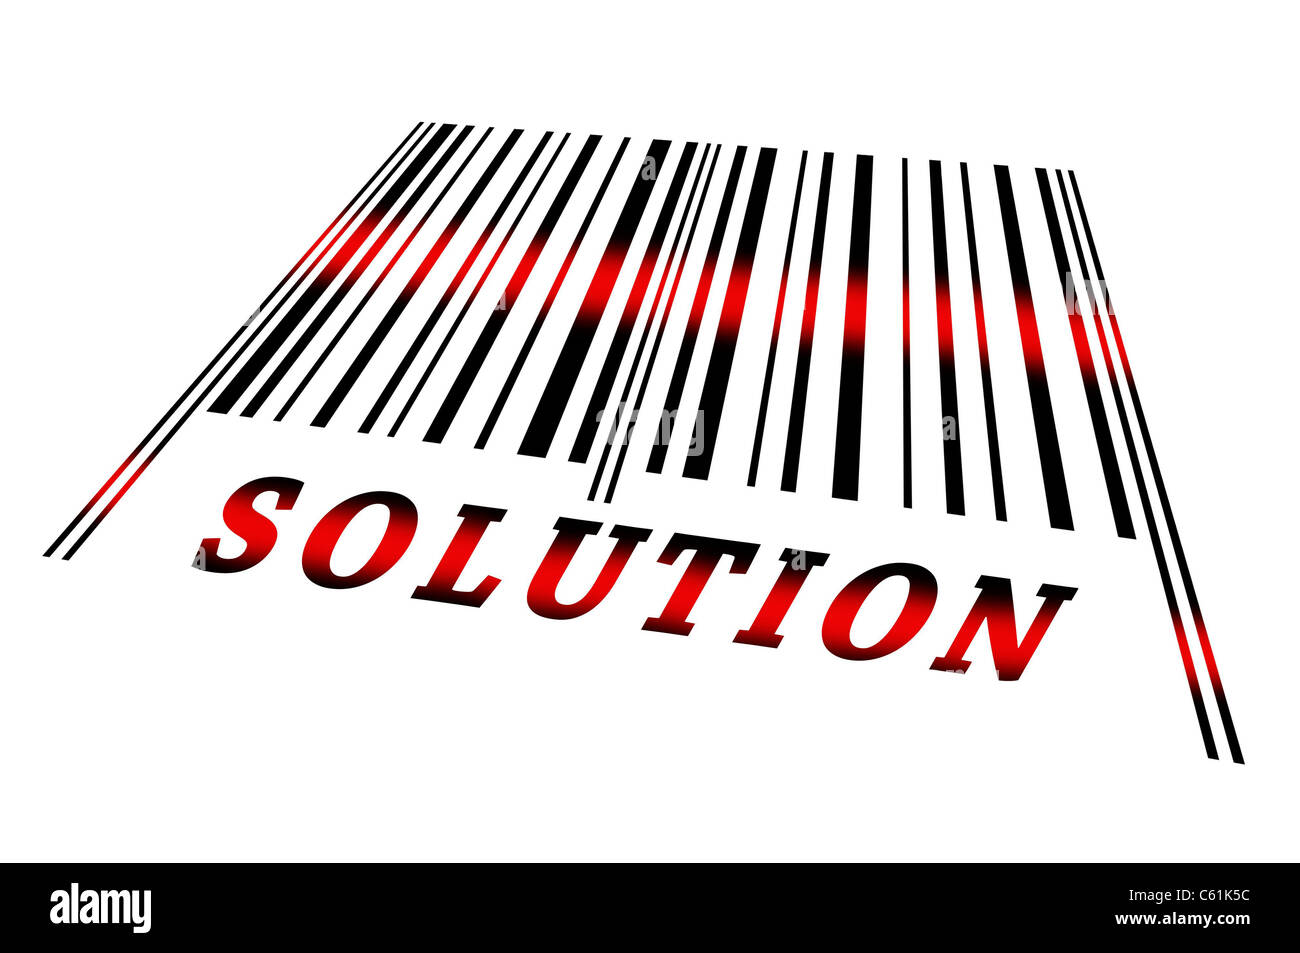 Solution word on barcode scanned Stock Photo